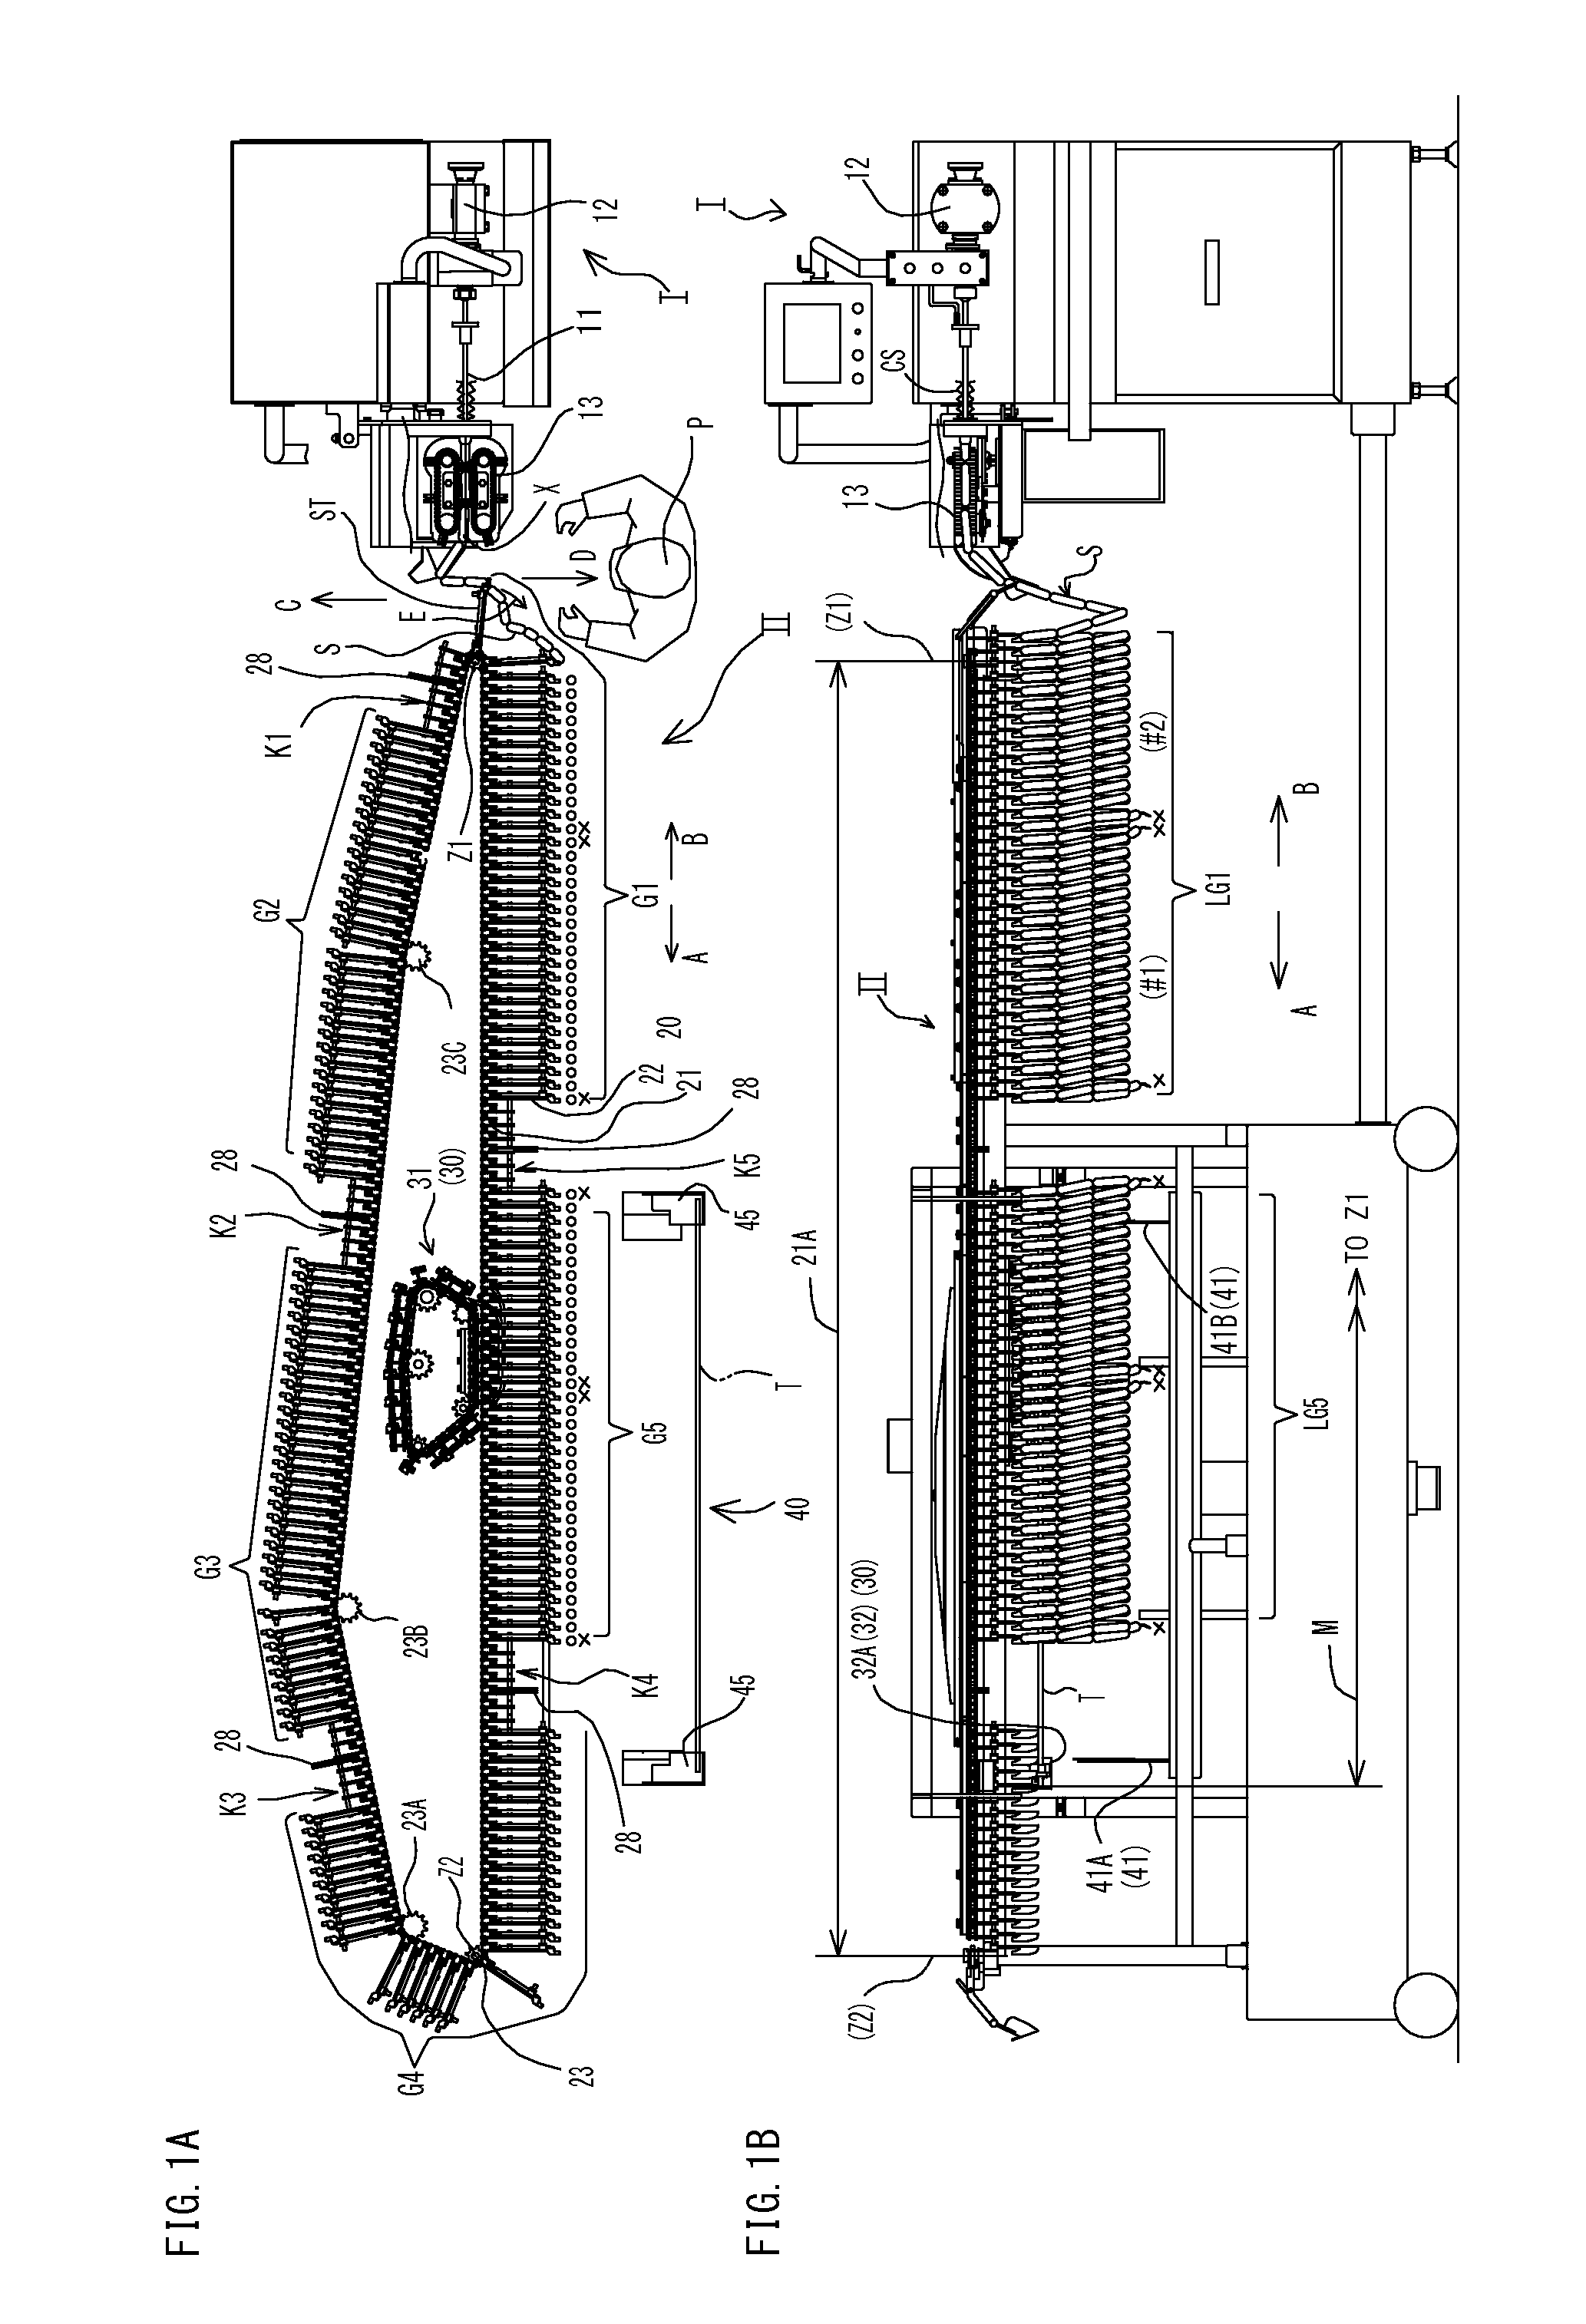 Apparatus and method for suspending sausage from hooks